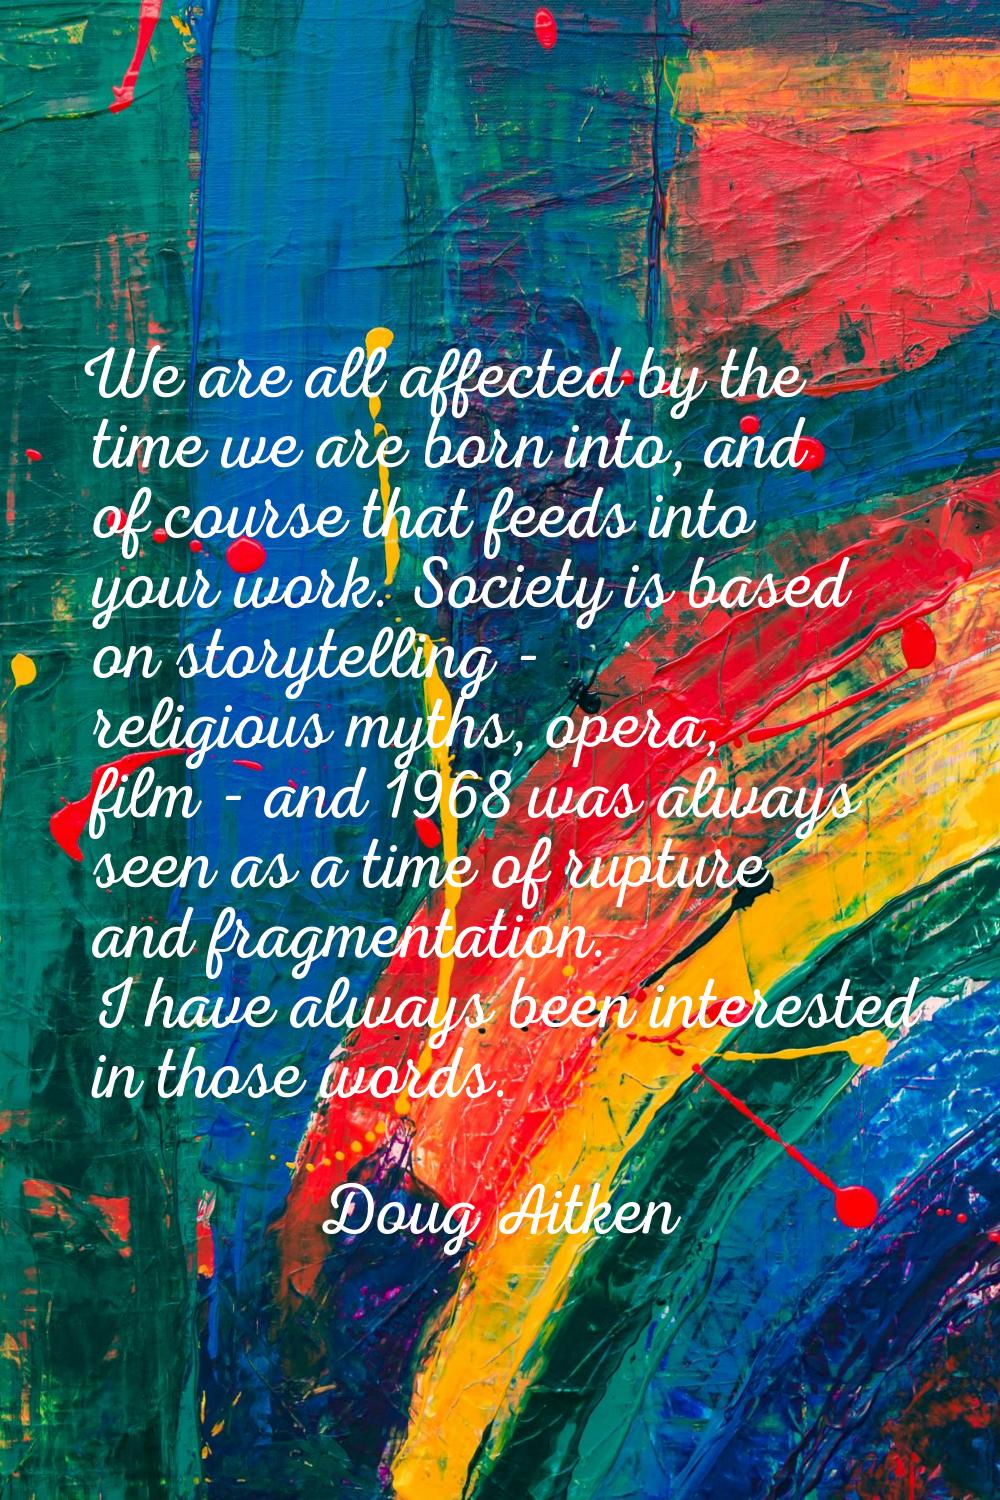 We are all affected by the time we are born into, and of course that feeds into your work. Society 